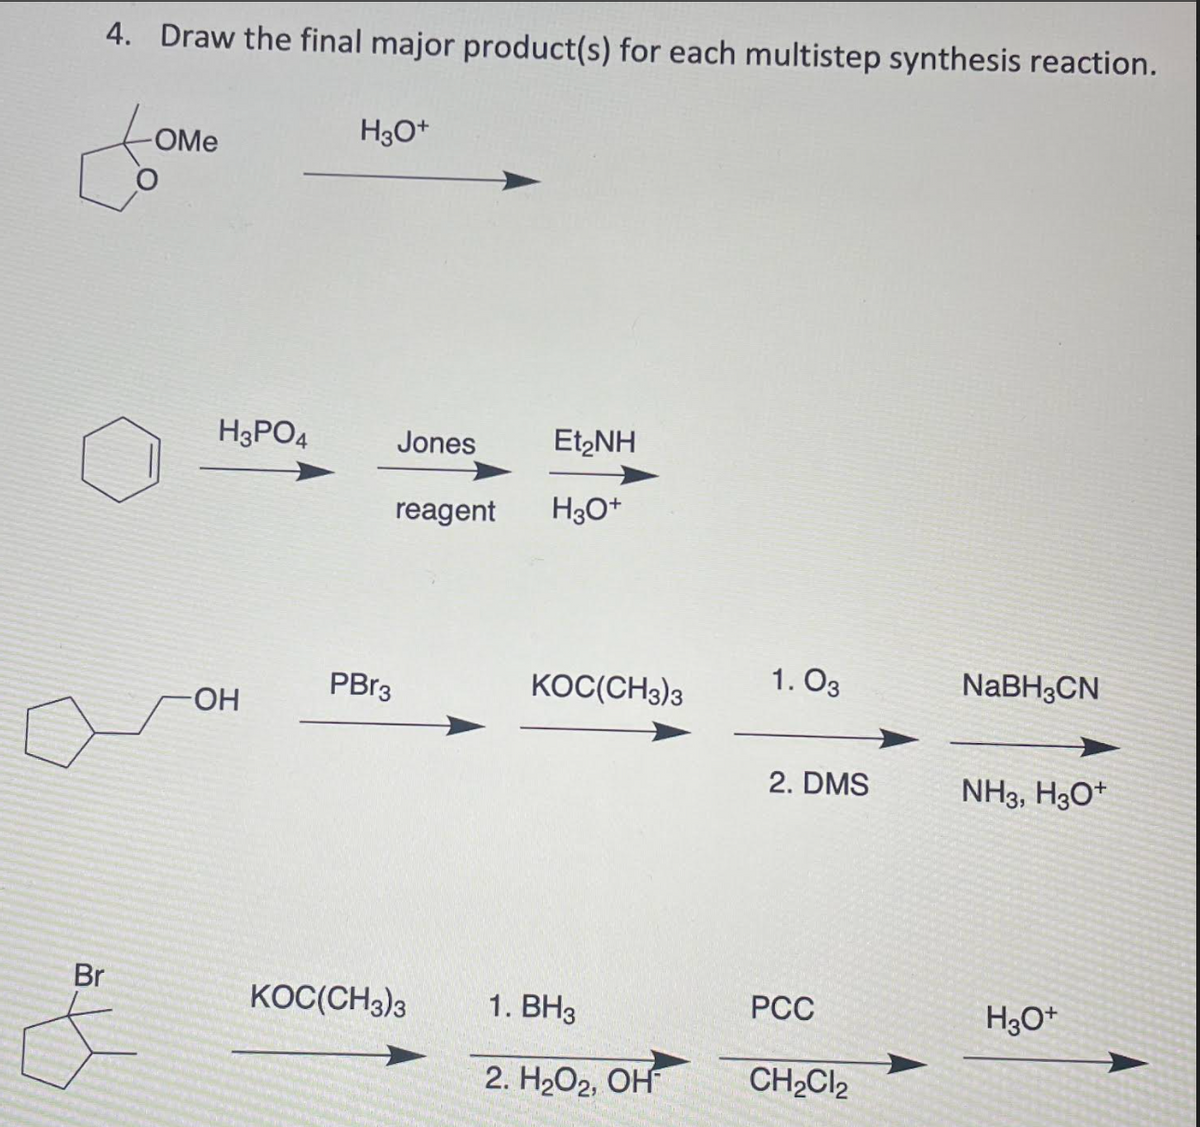 4. Draw the final major product(s) for each multistep synthesis reaction.
H3O*
OMe
H3PO4
Jones
Et,NH
reagent
H30*
PBR3
KOC(CH3)3
1. O3
NABH3CN
HO-
2. DMS
NH3, H3O*
Br
KOC(CH3)3
1. ВНз
PCC
H3O*
2. H2О2, ОН
CH2CI2
